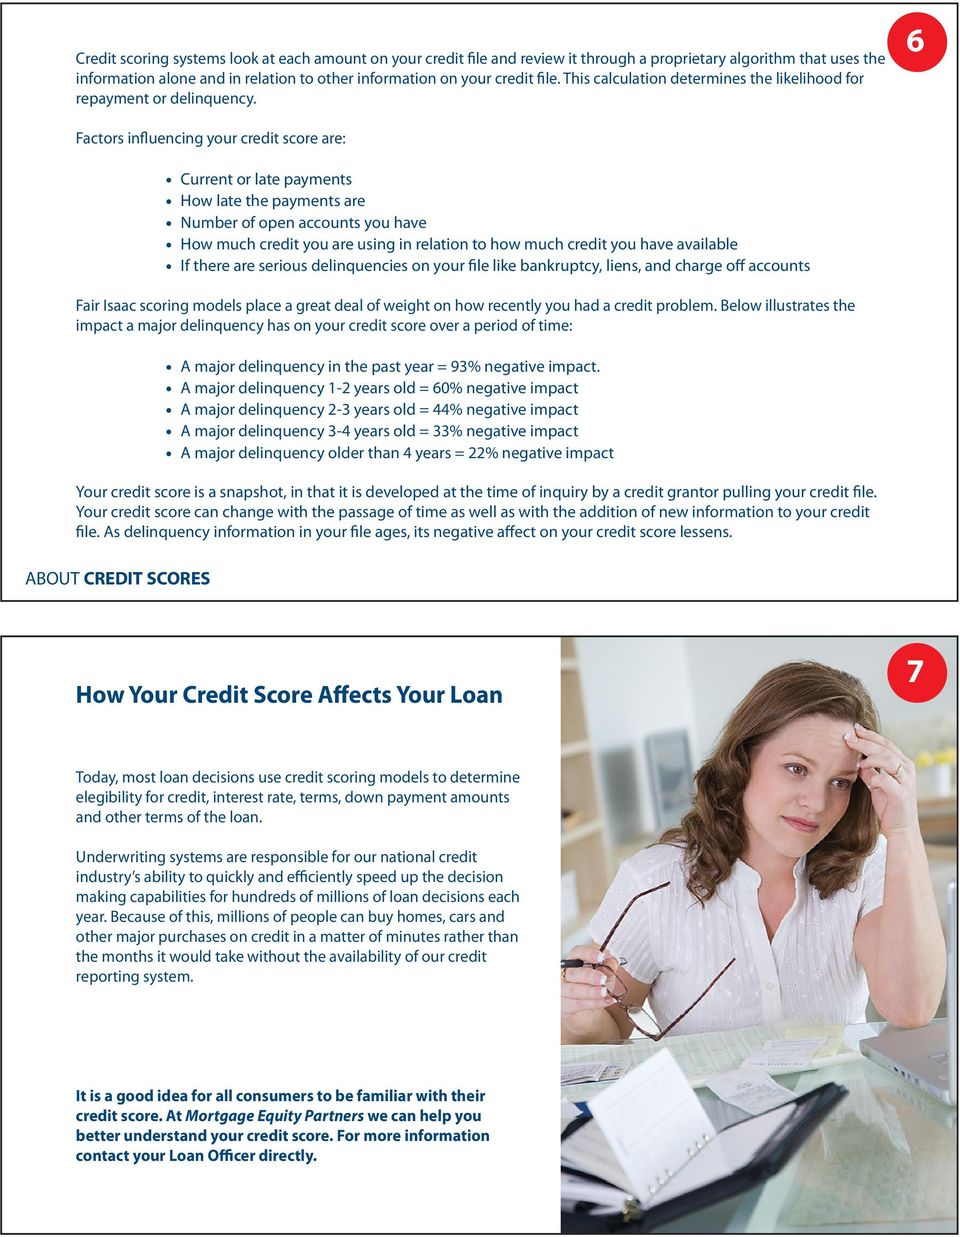 6 Factors influencing your credit score are: Current or late payments How late the payments are Number of open accounts you have How much credit you are using in relation to how much credit you have